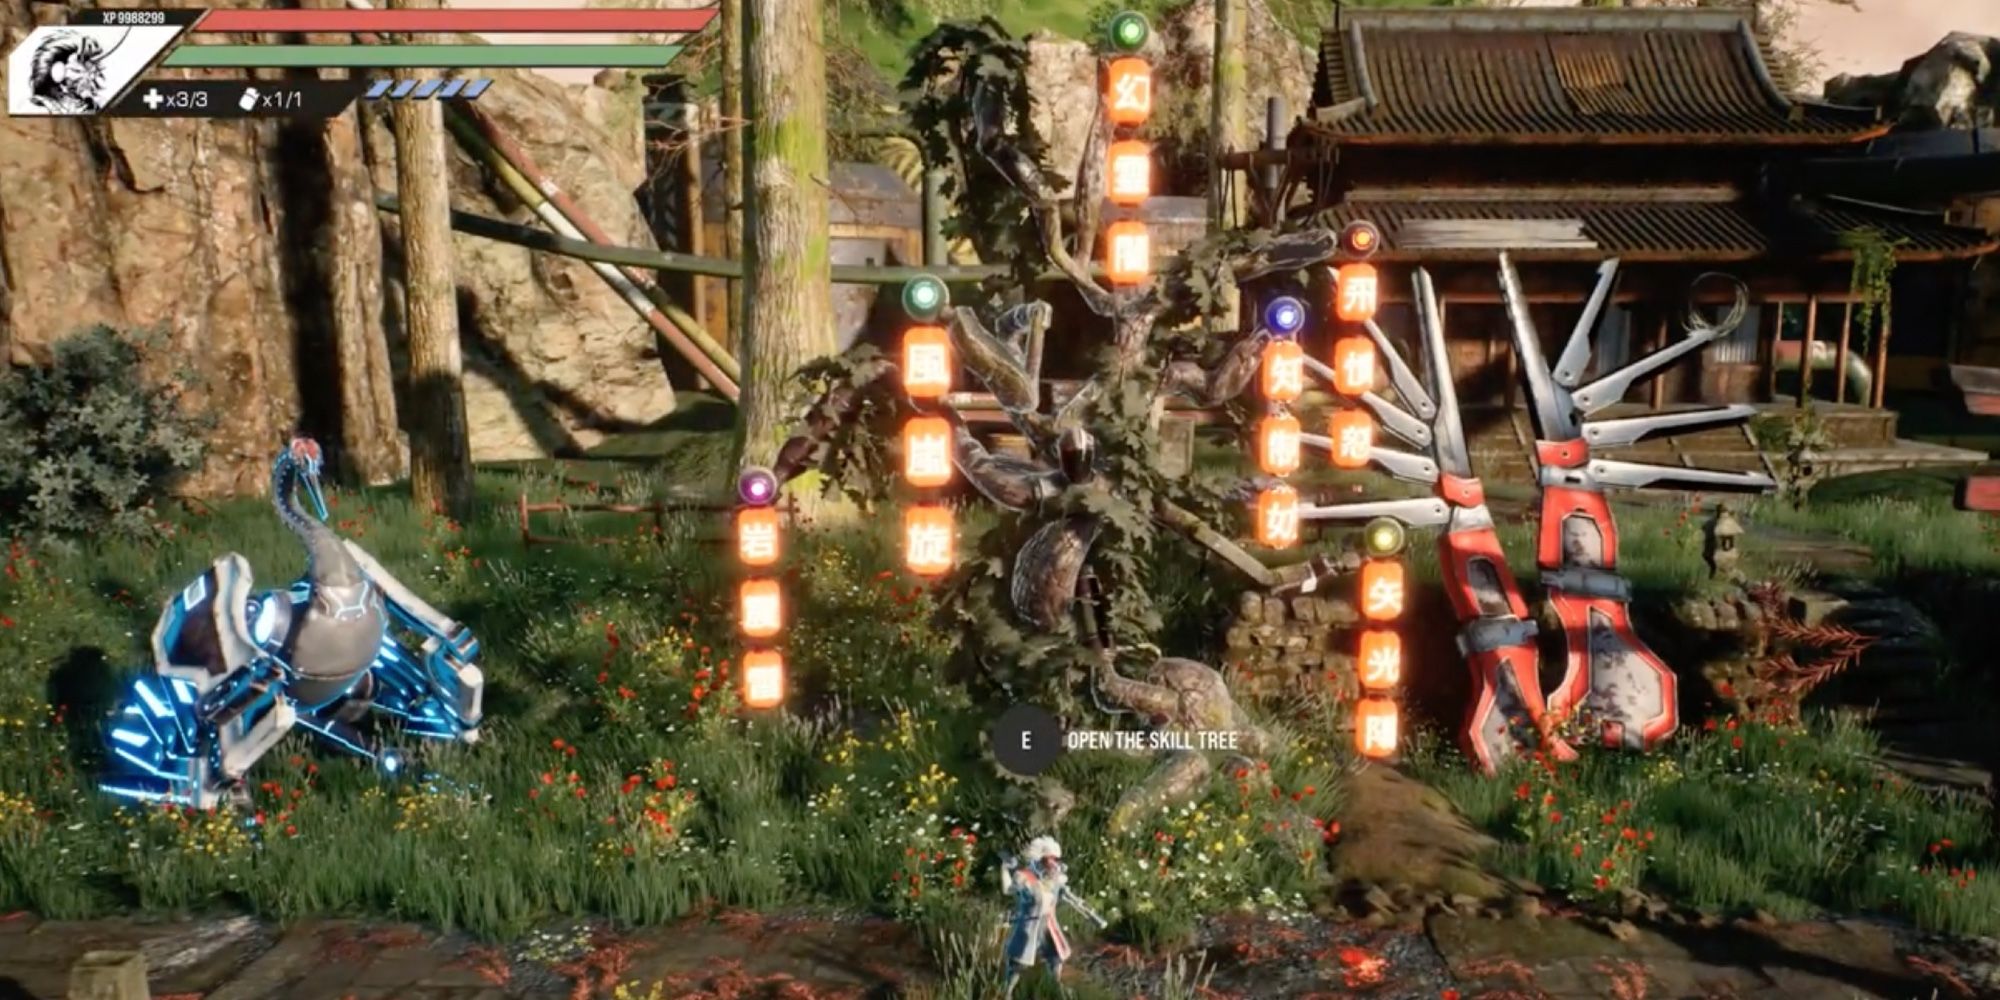 The player opens the skill tree at the dojo